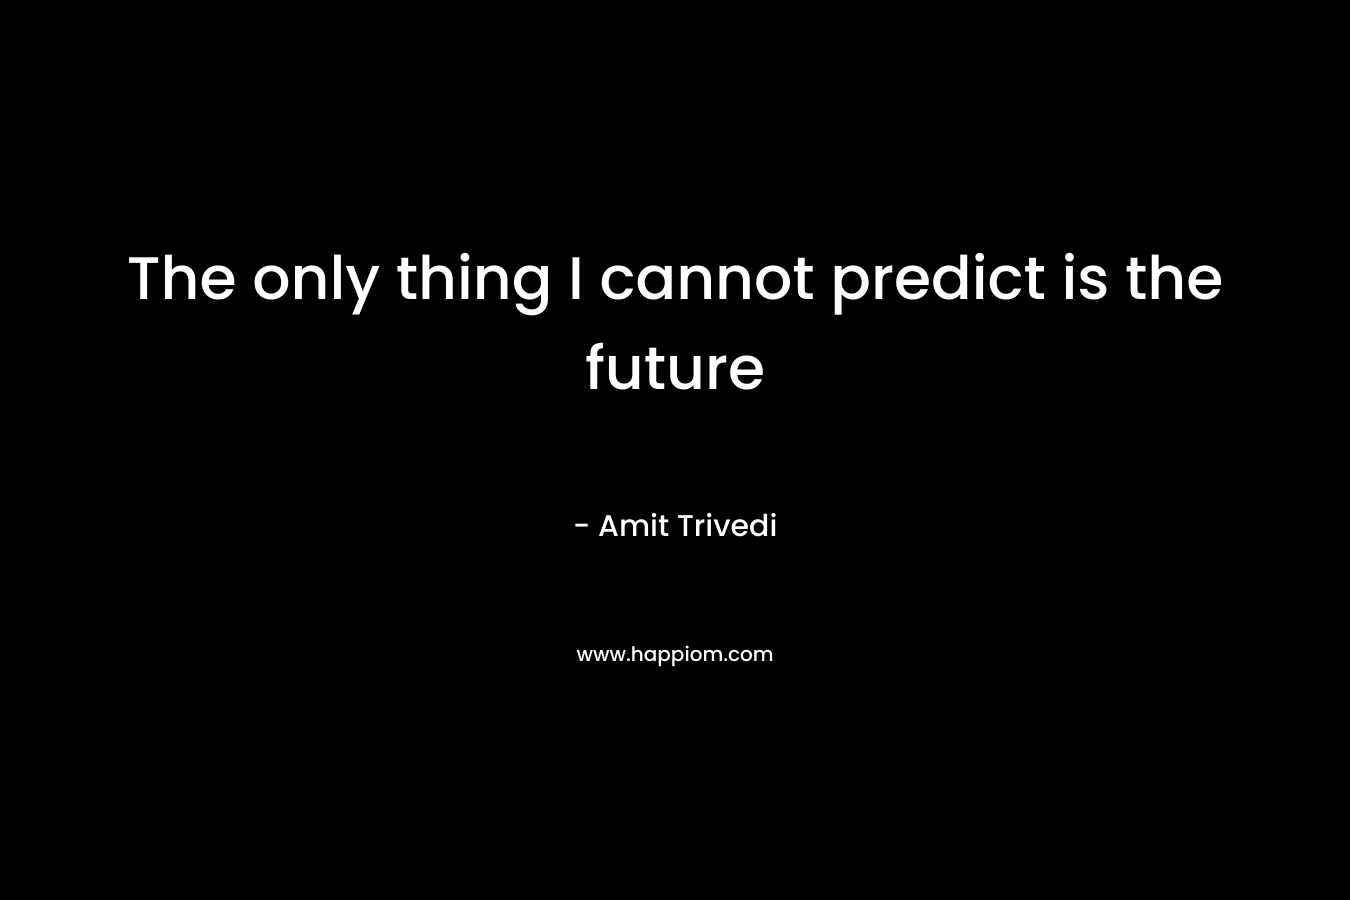 The only thing I cannot predict is the future